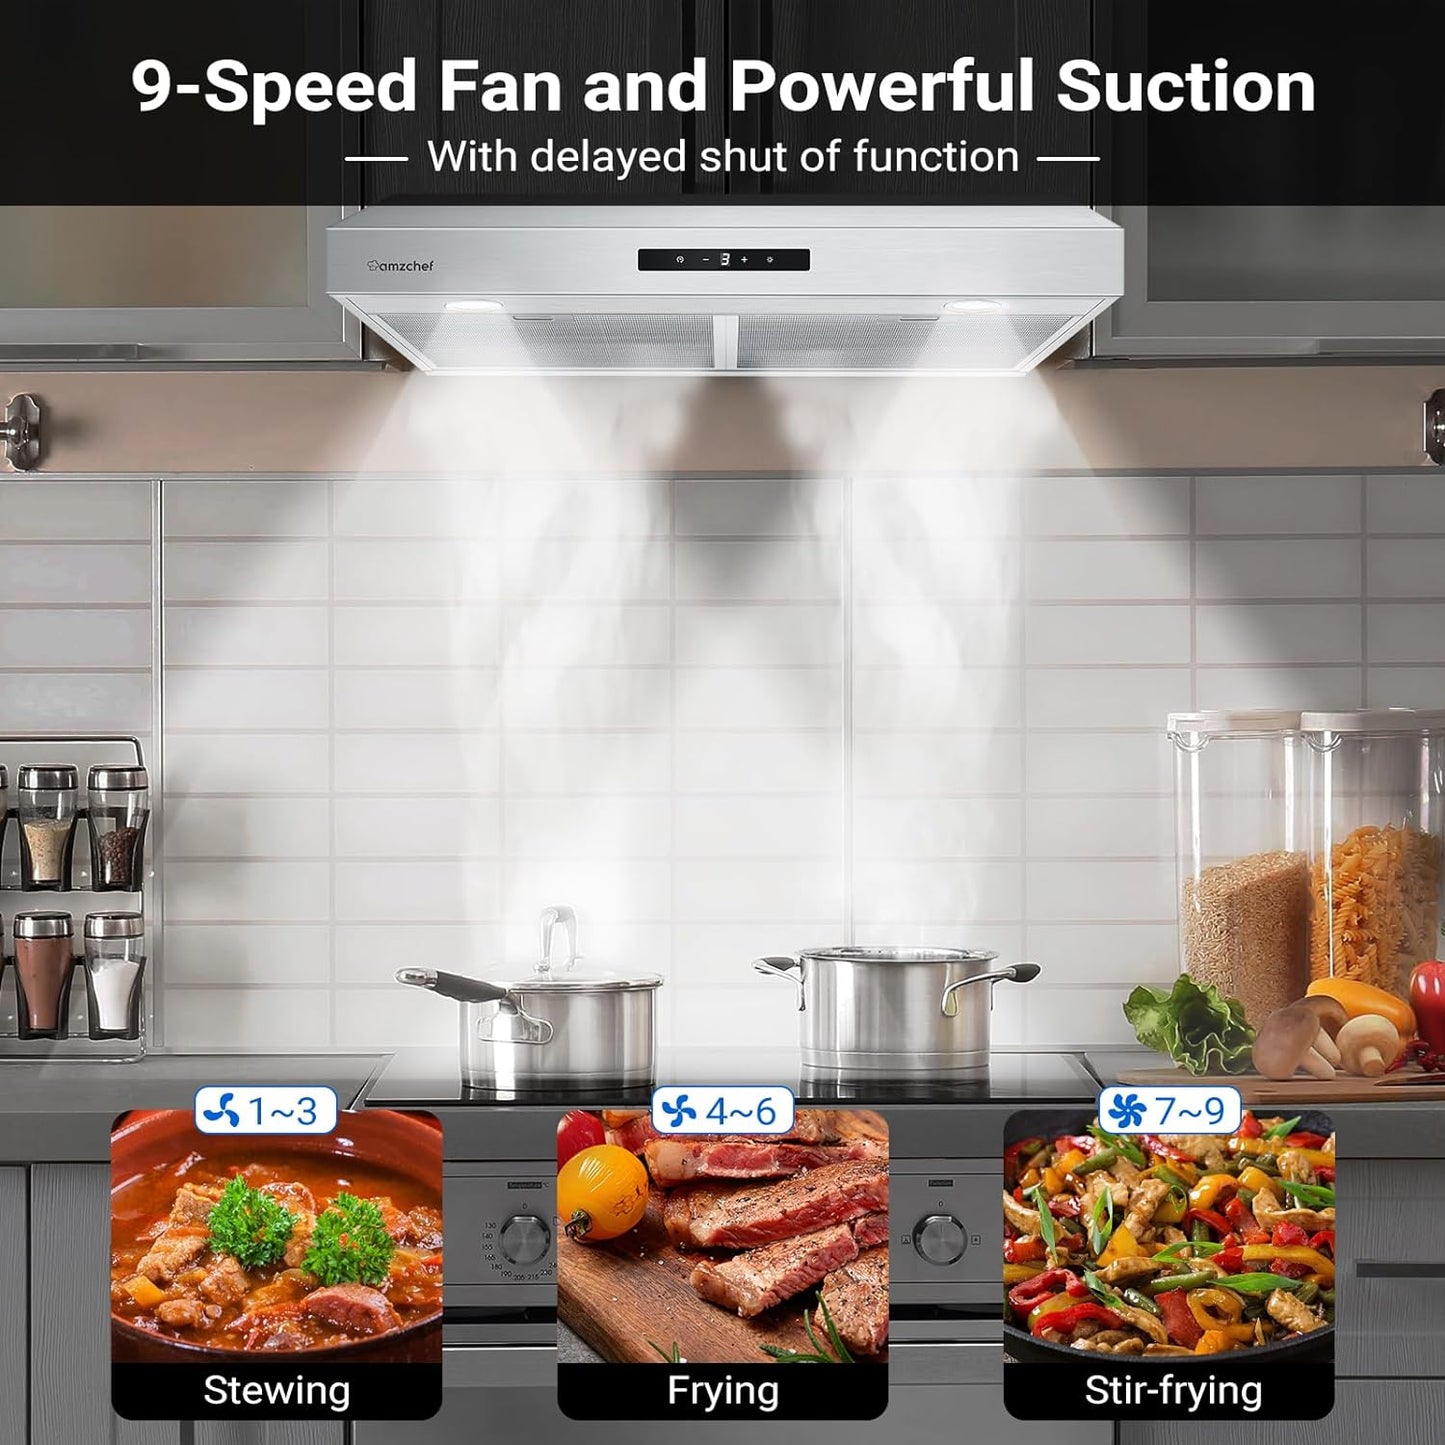 AMZCHEF Under Cabinet Range Hood 30 Inch,900CFM DC Motor Stainless Steel Kitchen Stove Vent Hood 9 Speed Exhaust Fan Touch Control LED lights Time Setting Dishwasher-Safe Filters